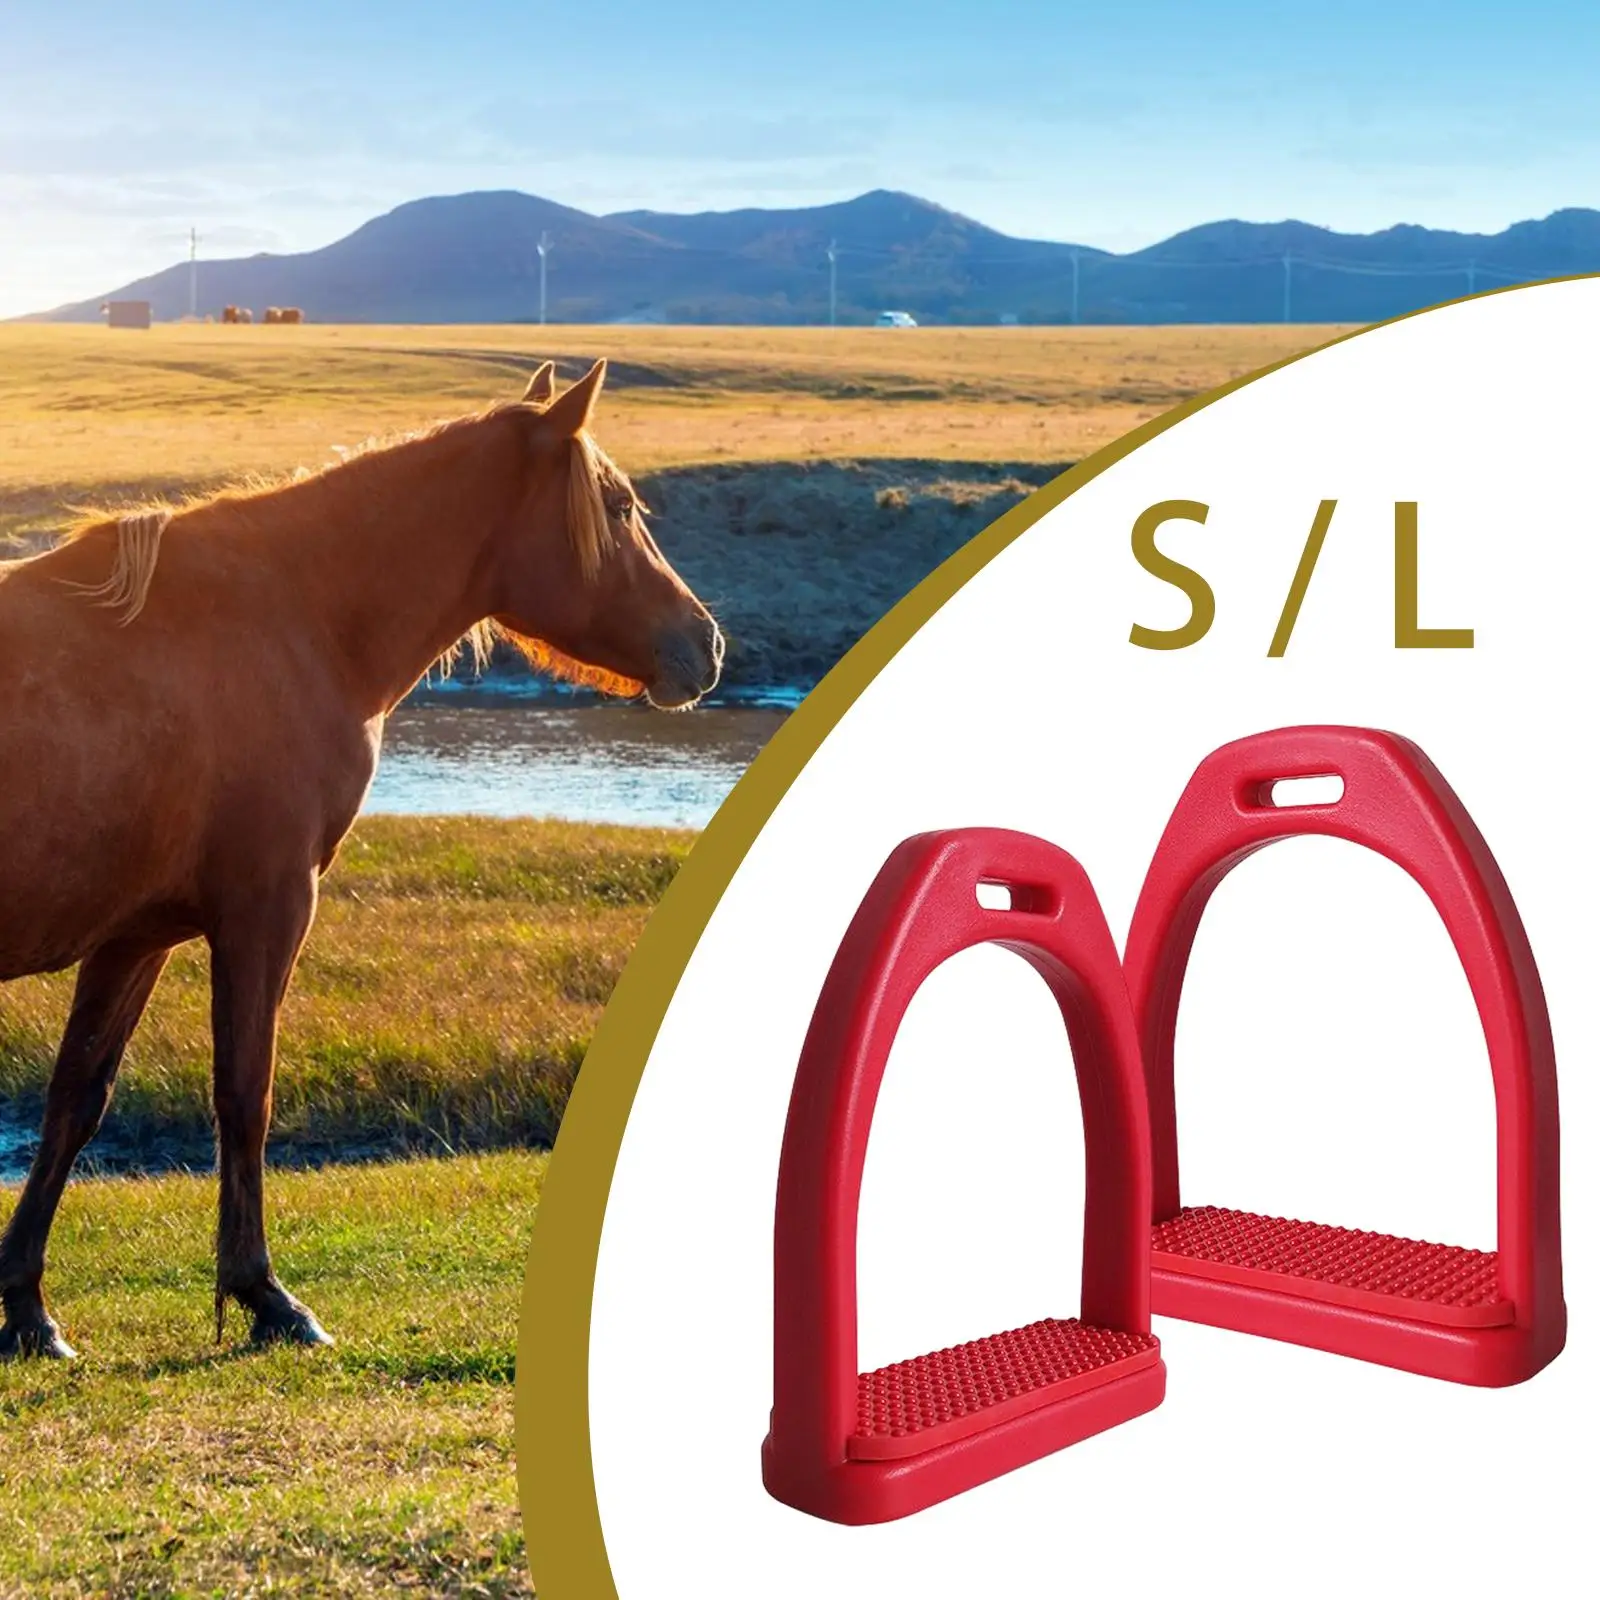 2x Horse Riding Stirrups Non Slip Training Tool Equestrian Rubber Pad for Safety Horse Riding Outdoor Equipment Childen Adults